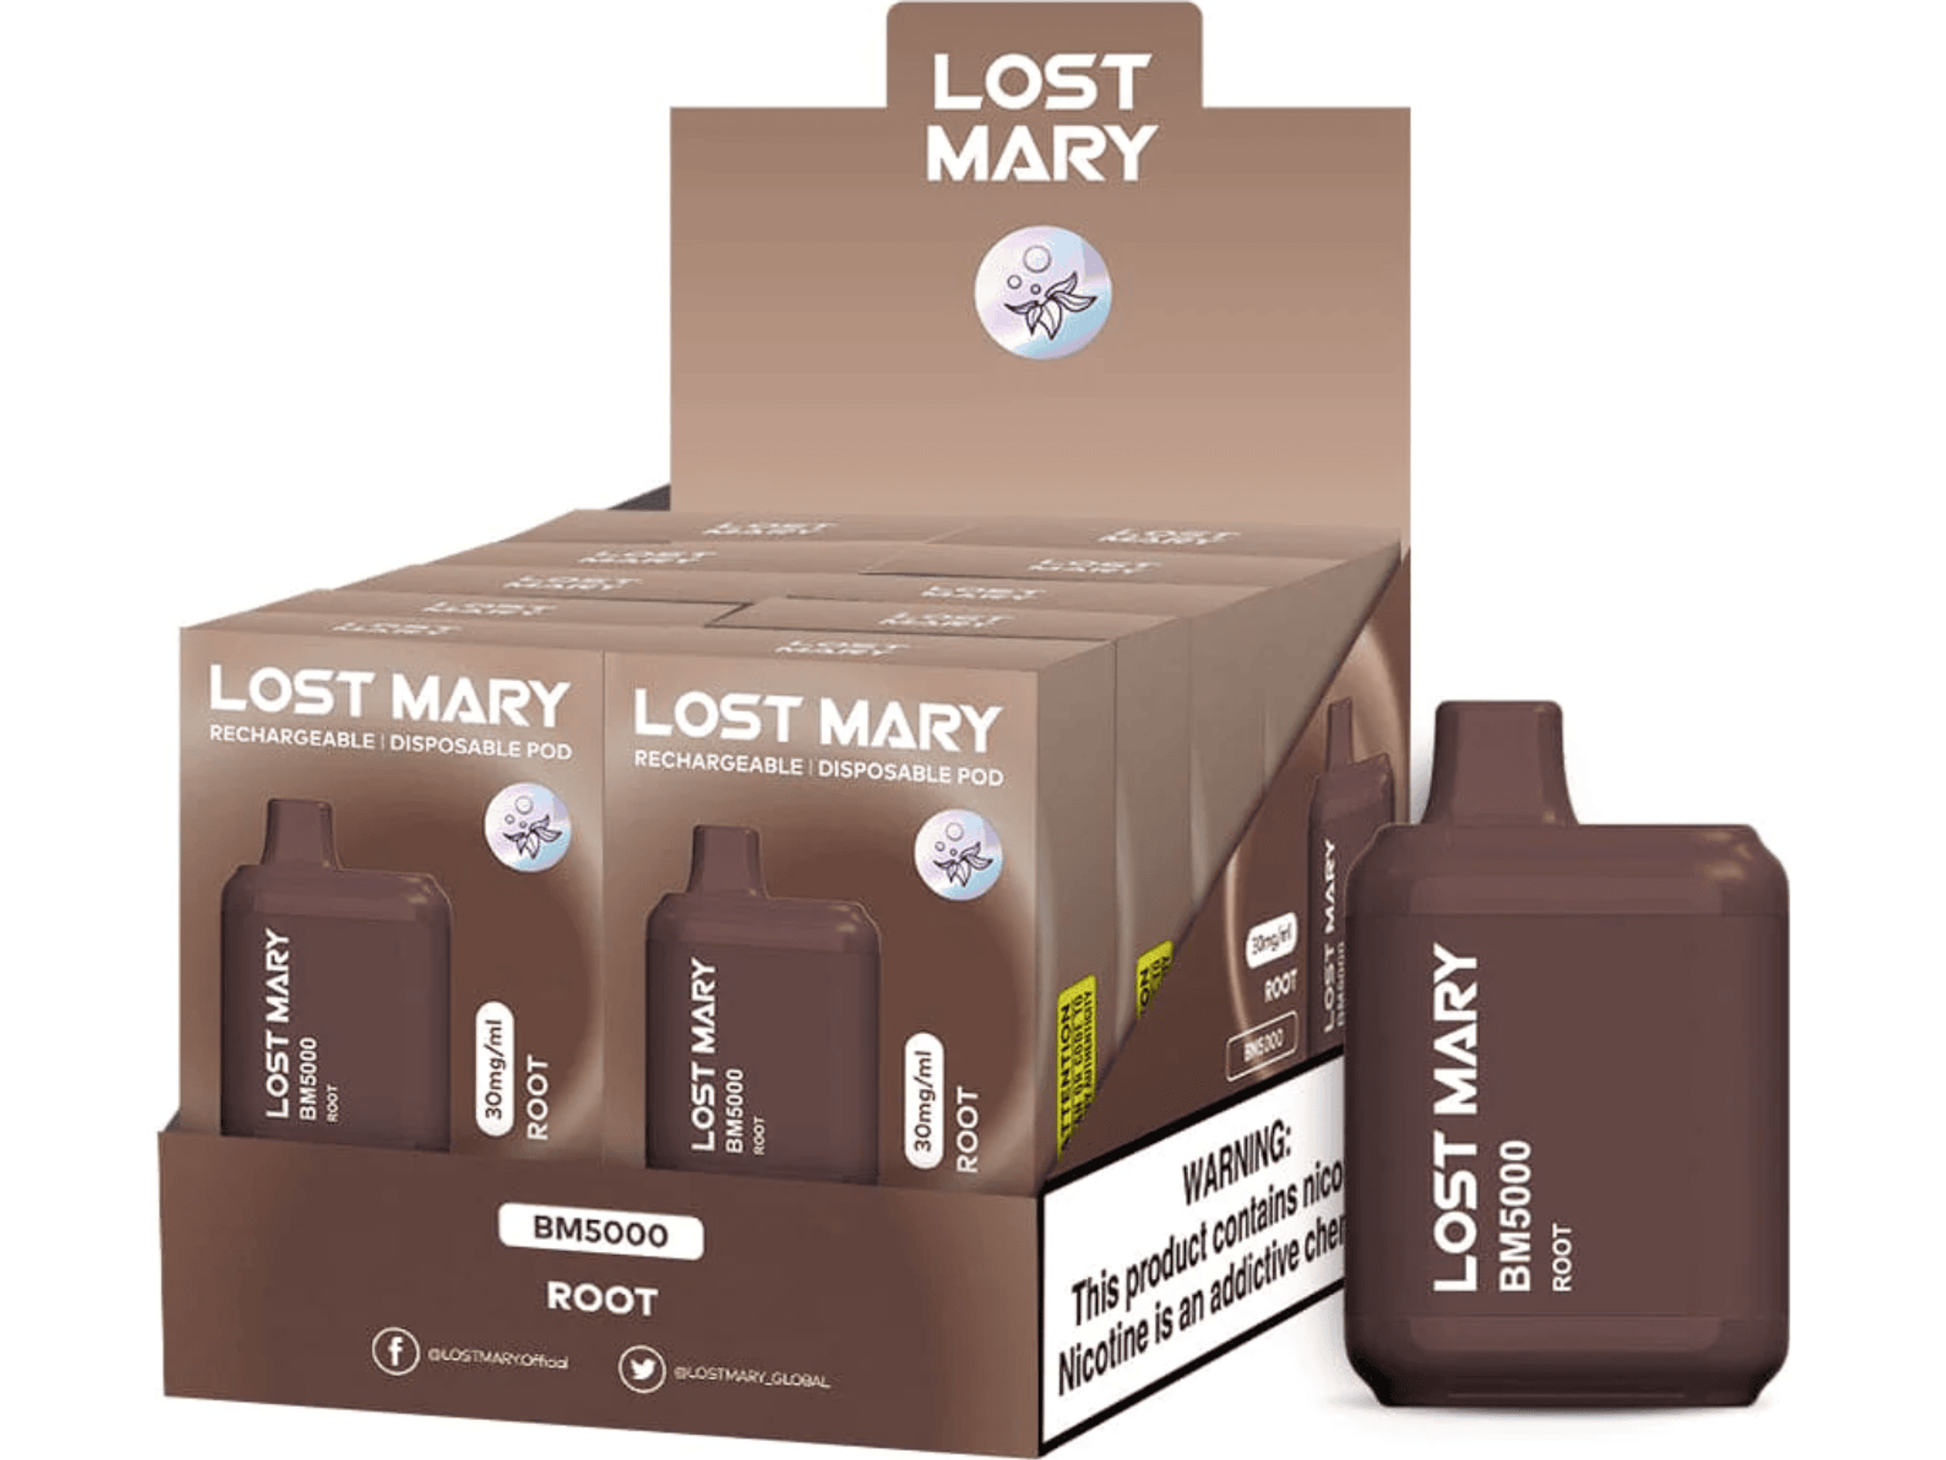 Lost Mary BM5000 Root flavored disposable vape device and box.